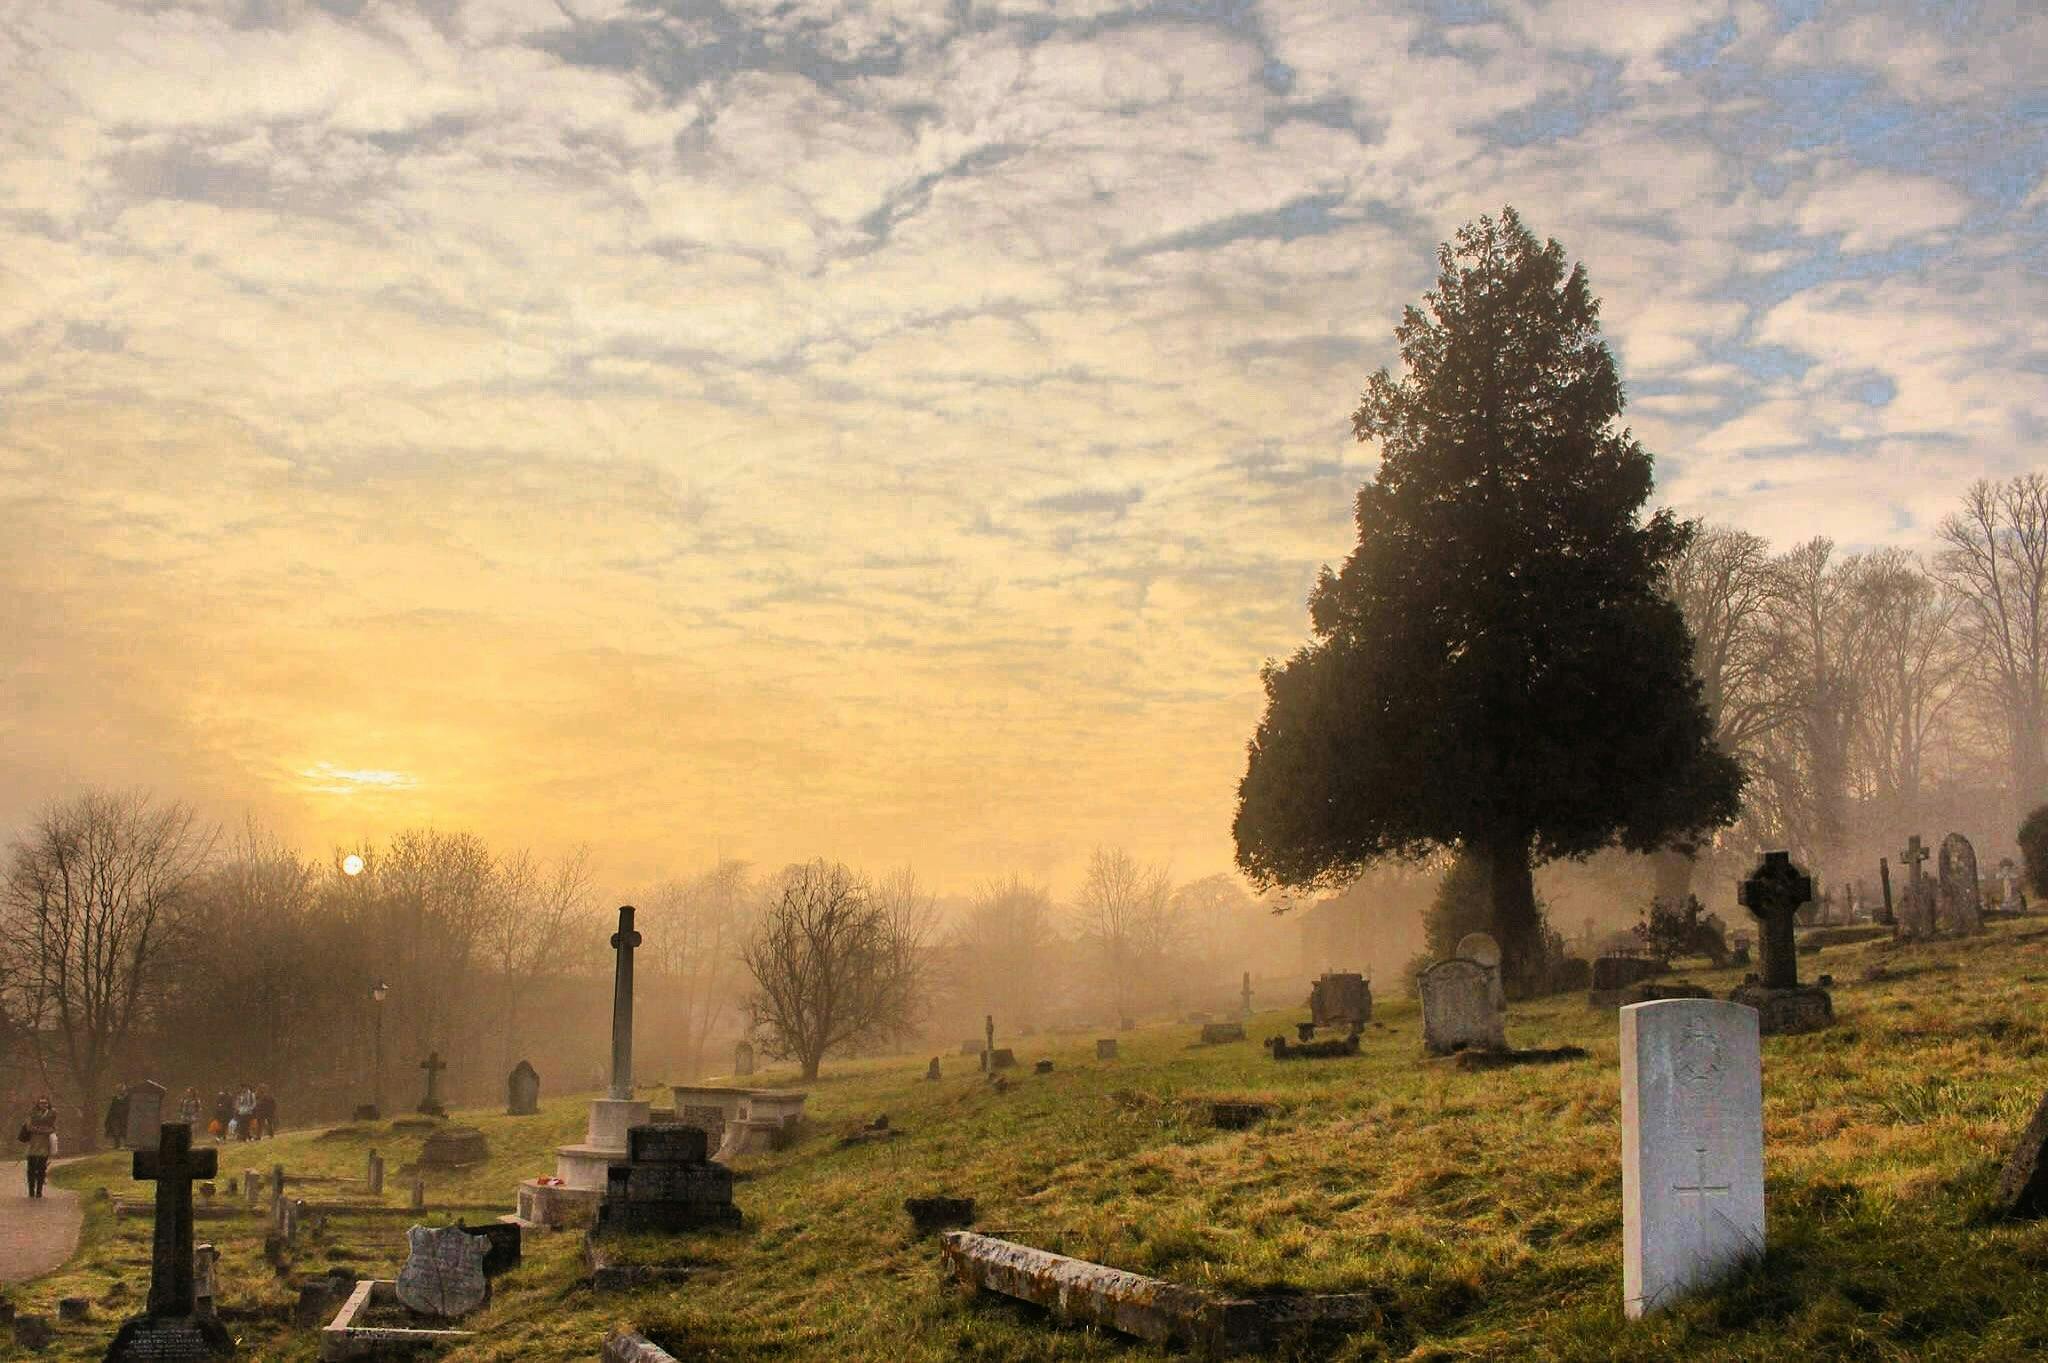 Cemetery under the cloudy sky | Photo: Pexels